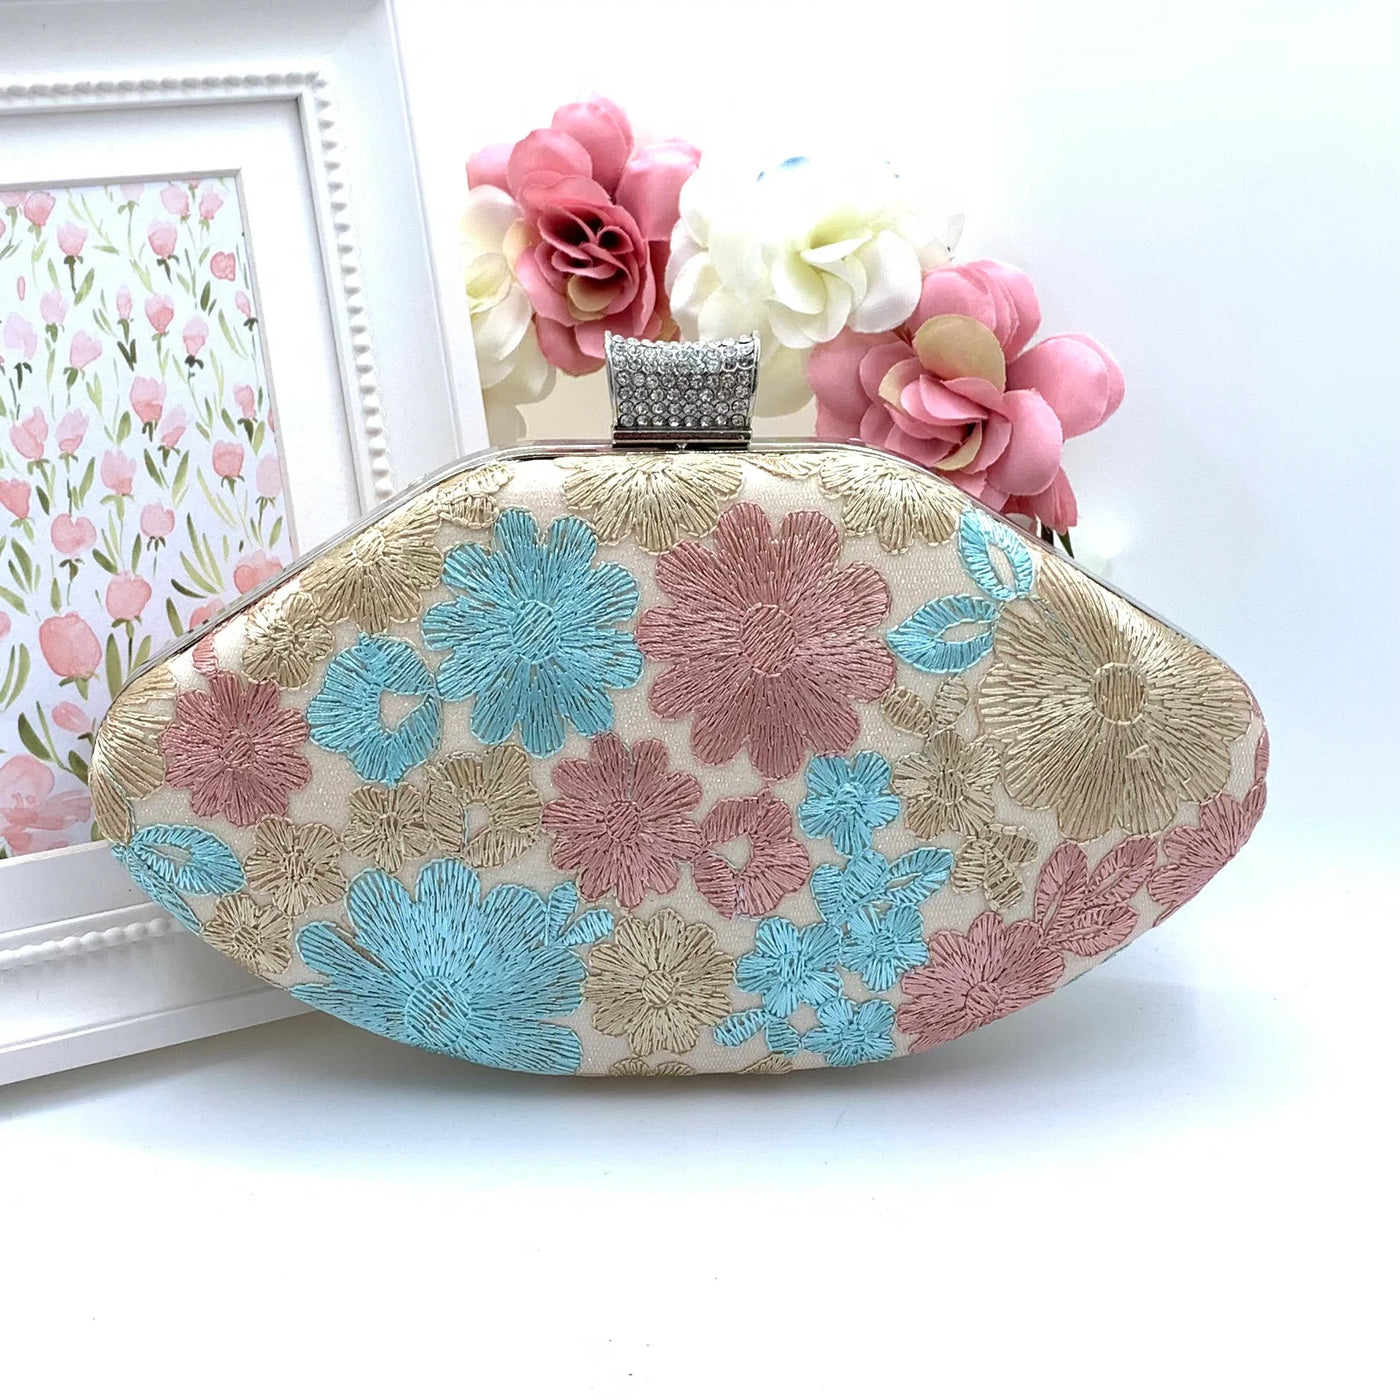 Lace embroidered case bag